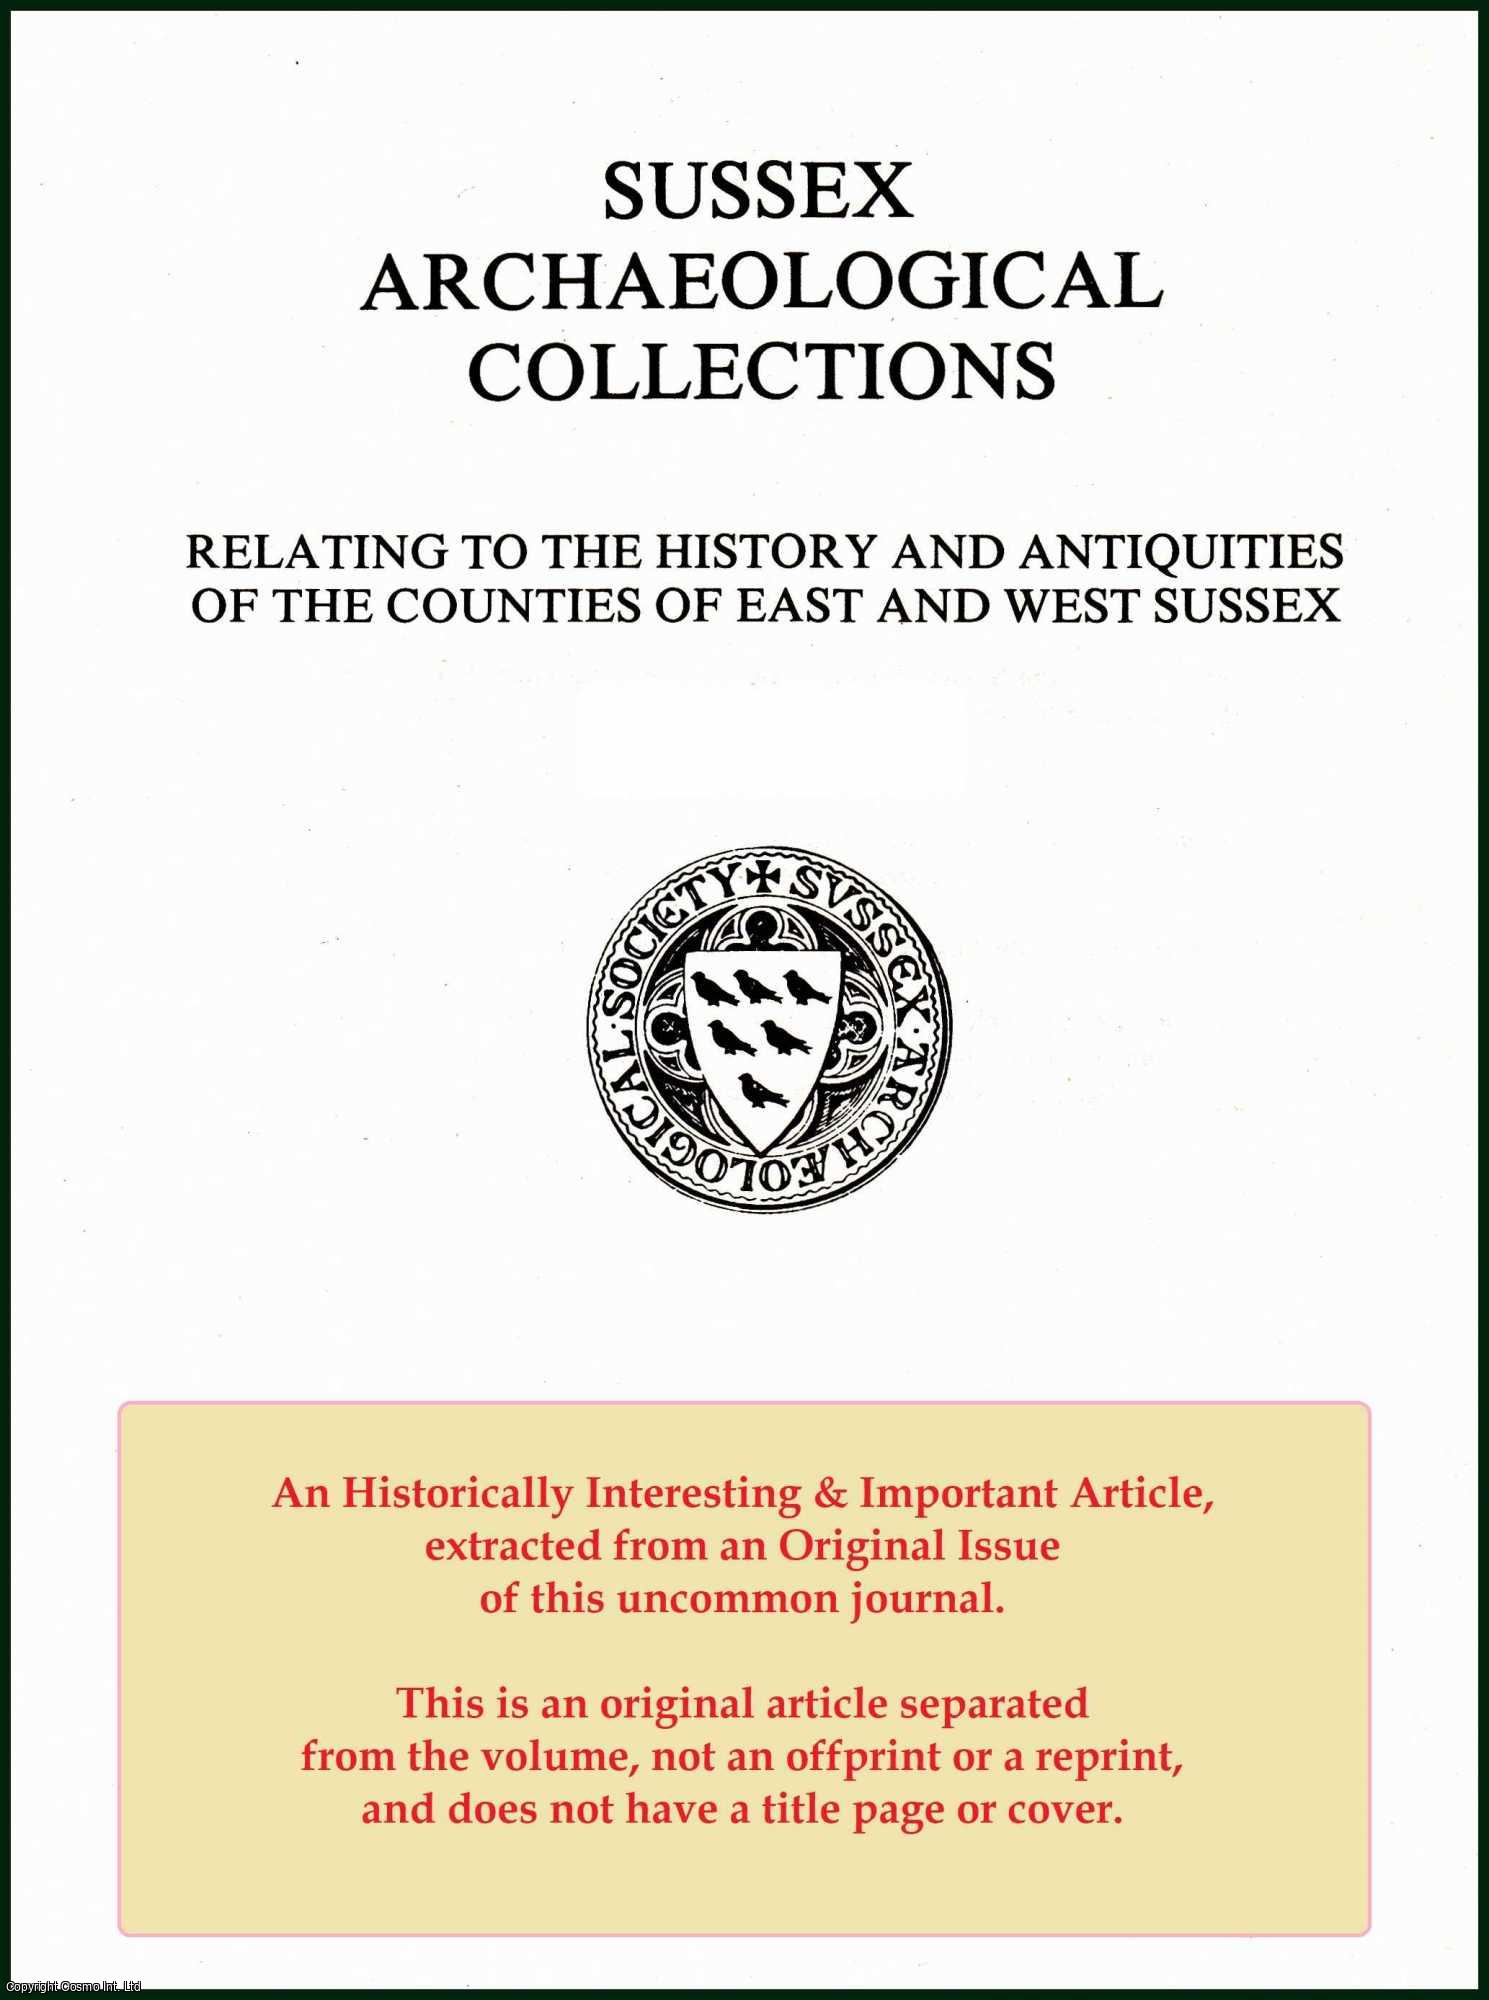 John Farrant, Maurice Howard, David Rudling, John Warren and Christopher Whittick - Laughton Place: A Manorial and Architectural History, with an Account of Recent Restoration and Excavation. An original article from the journal of the Sussex Archaeological Society, 1991.